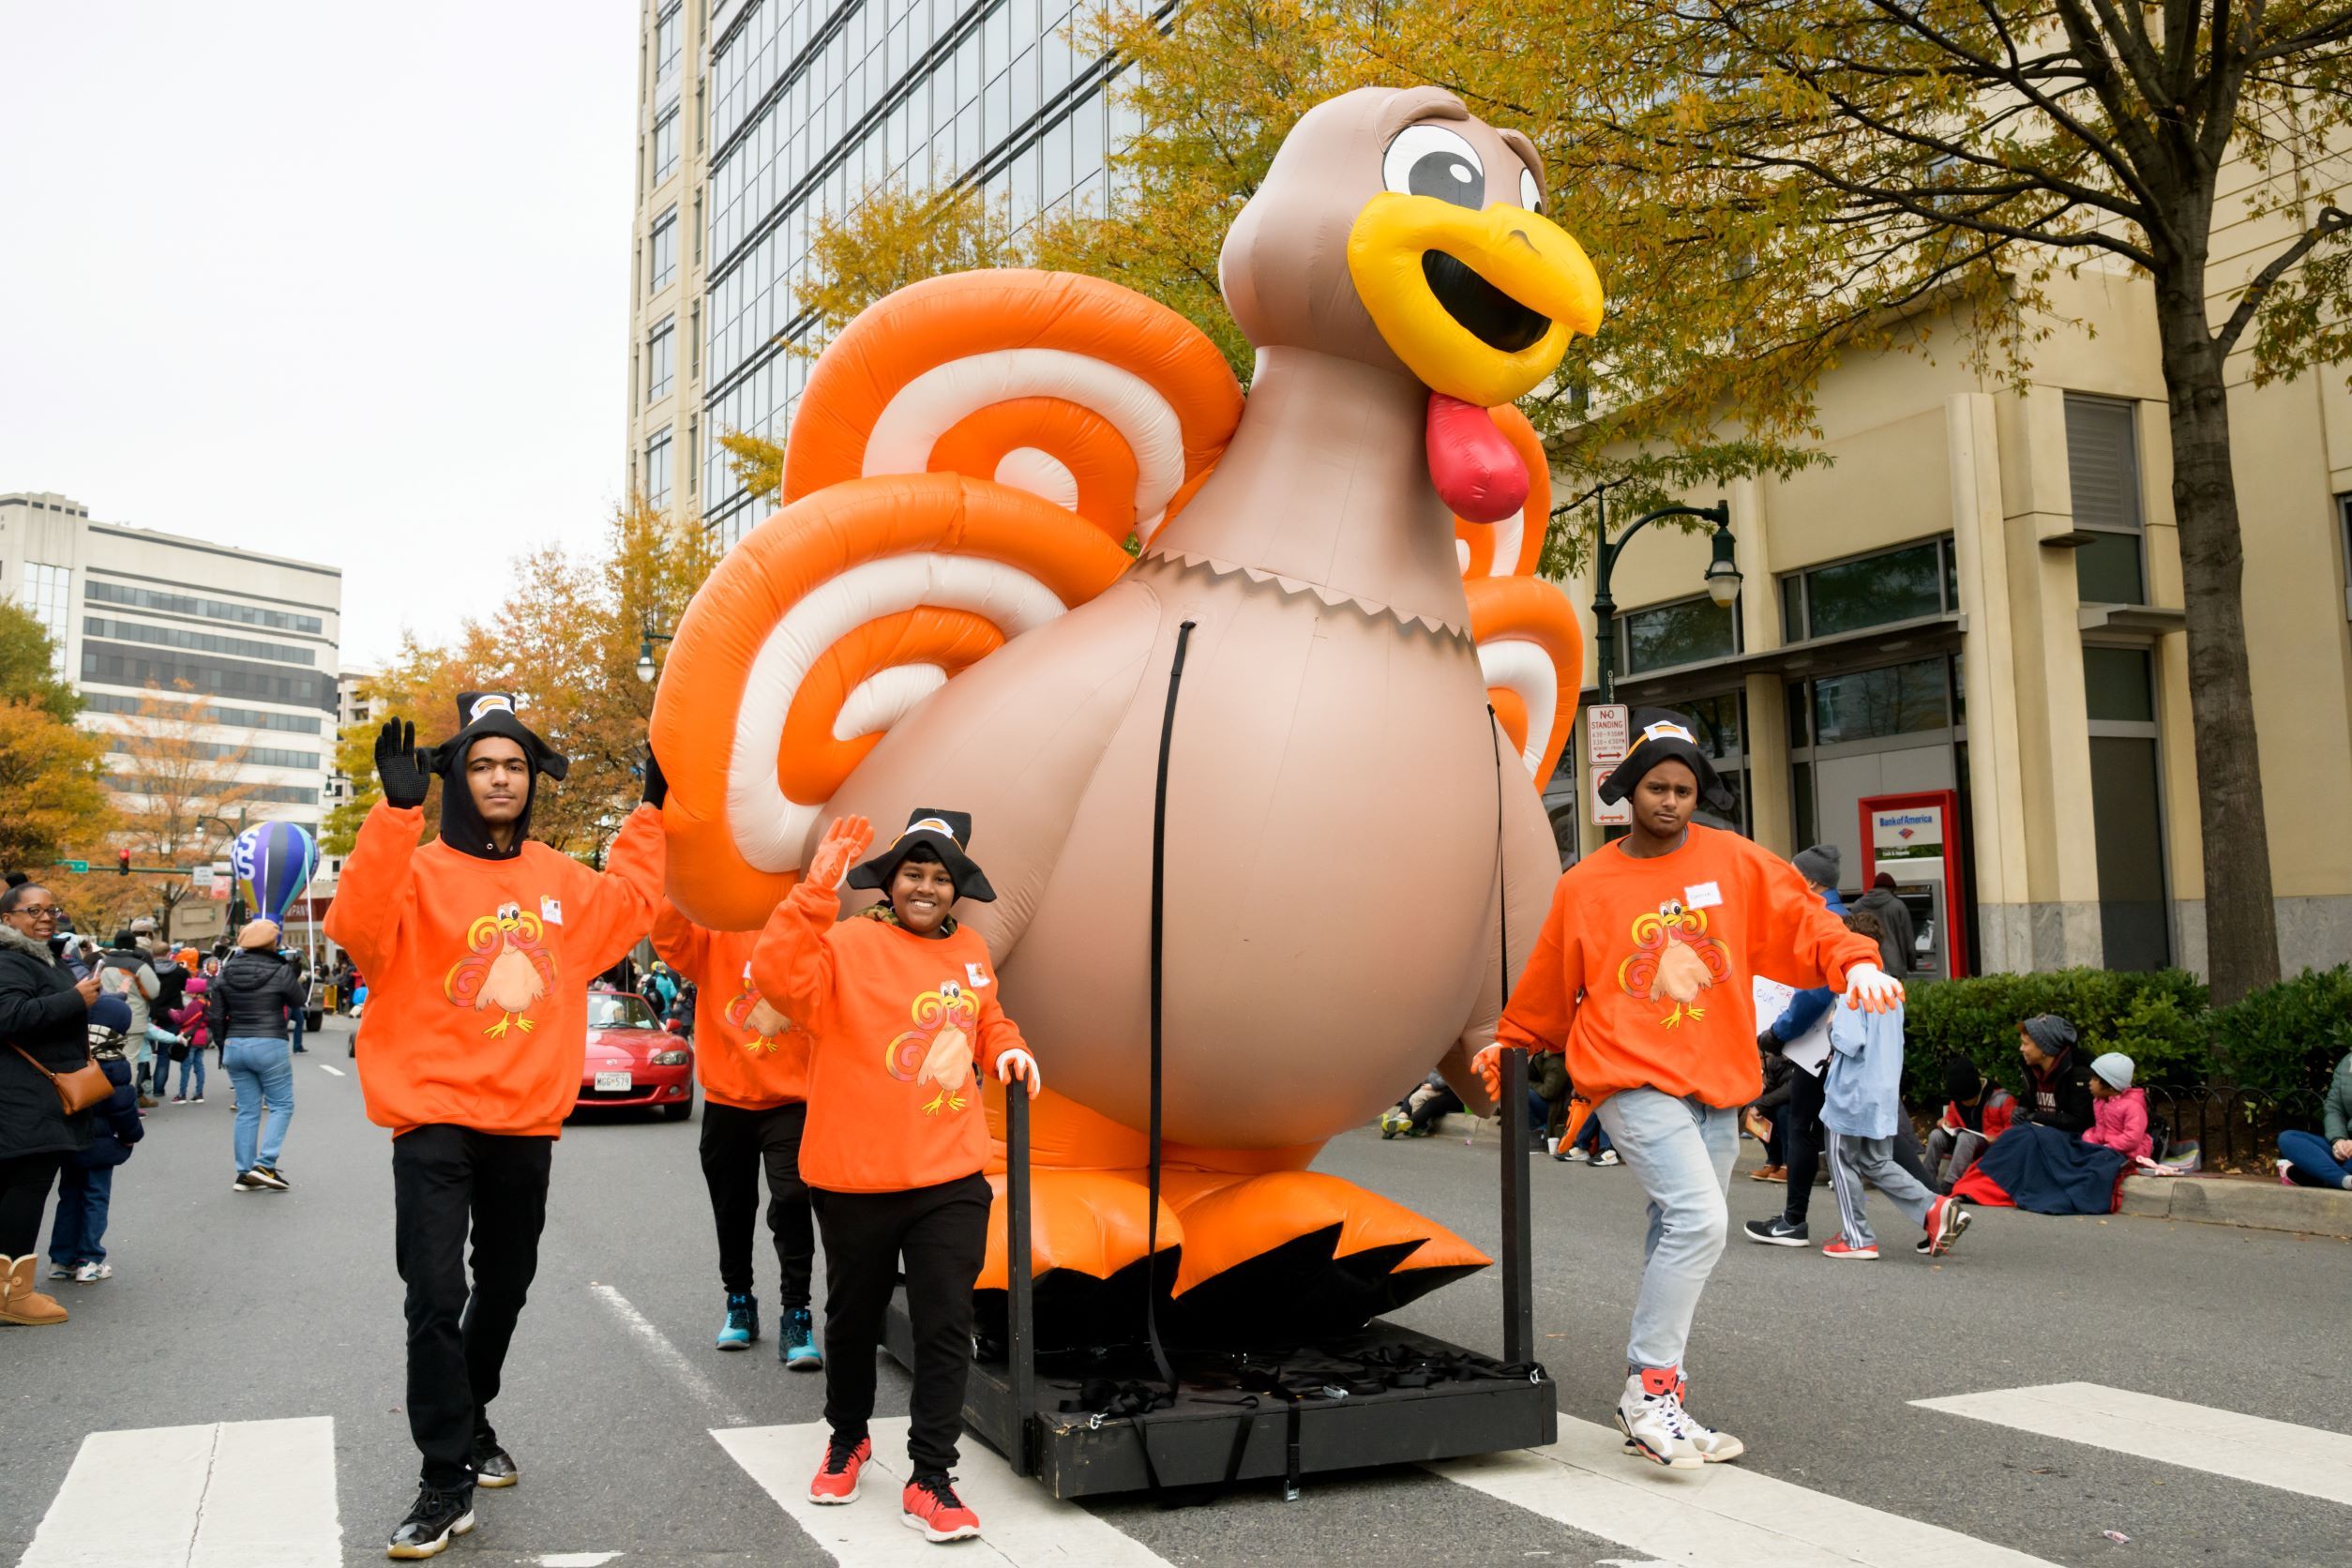 Montgomery County Thanksgiving Parade